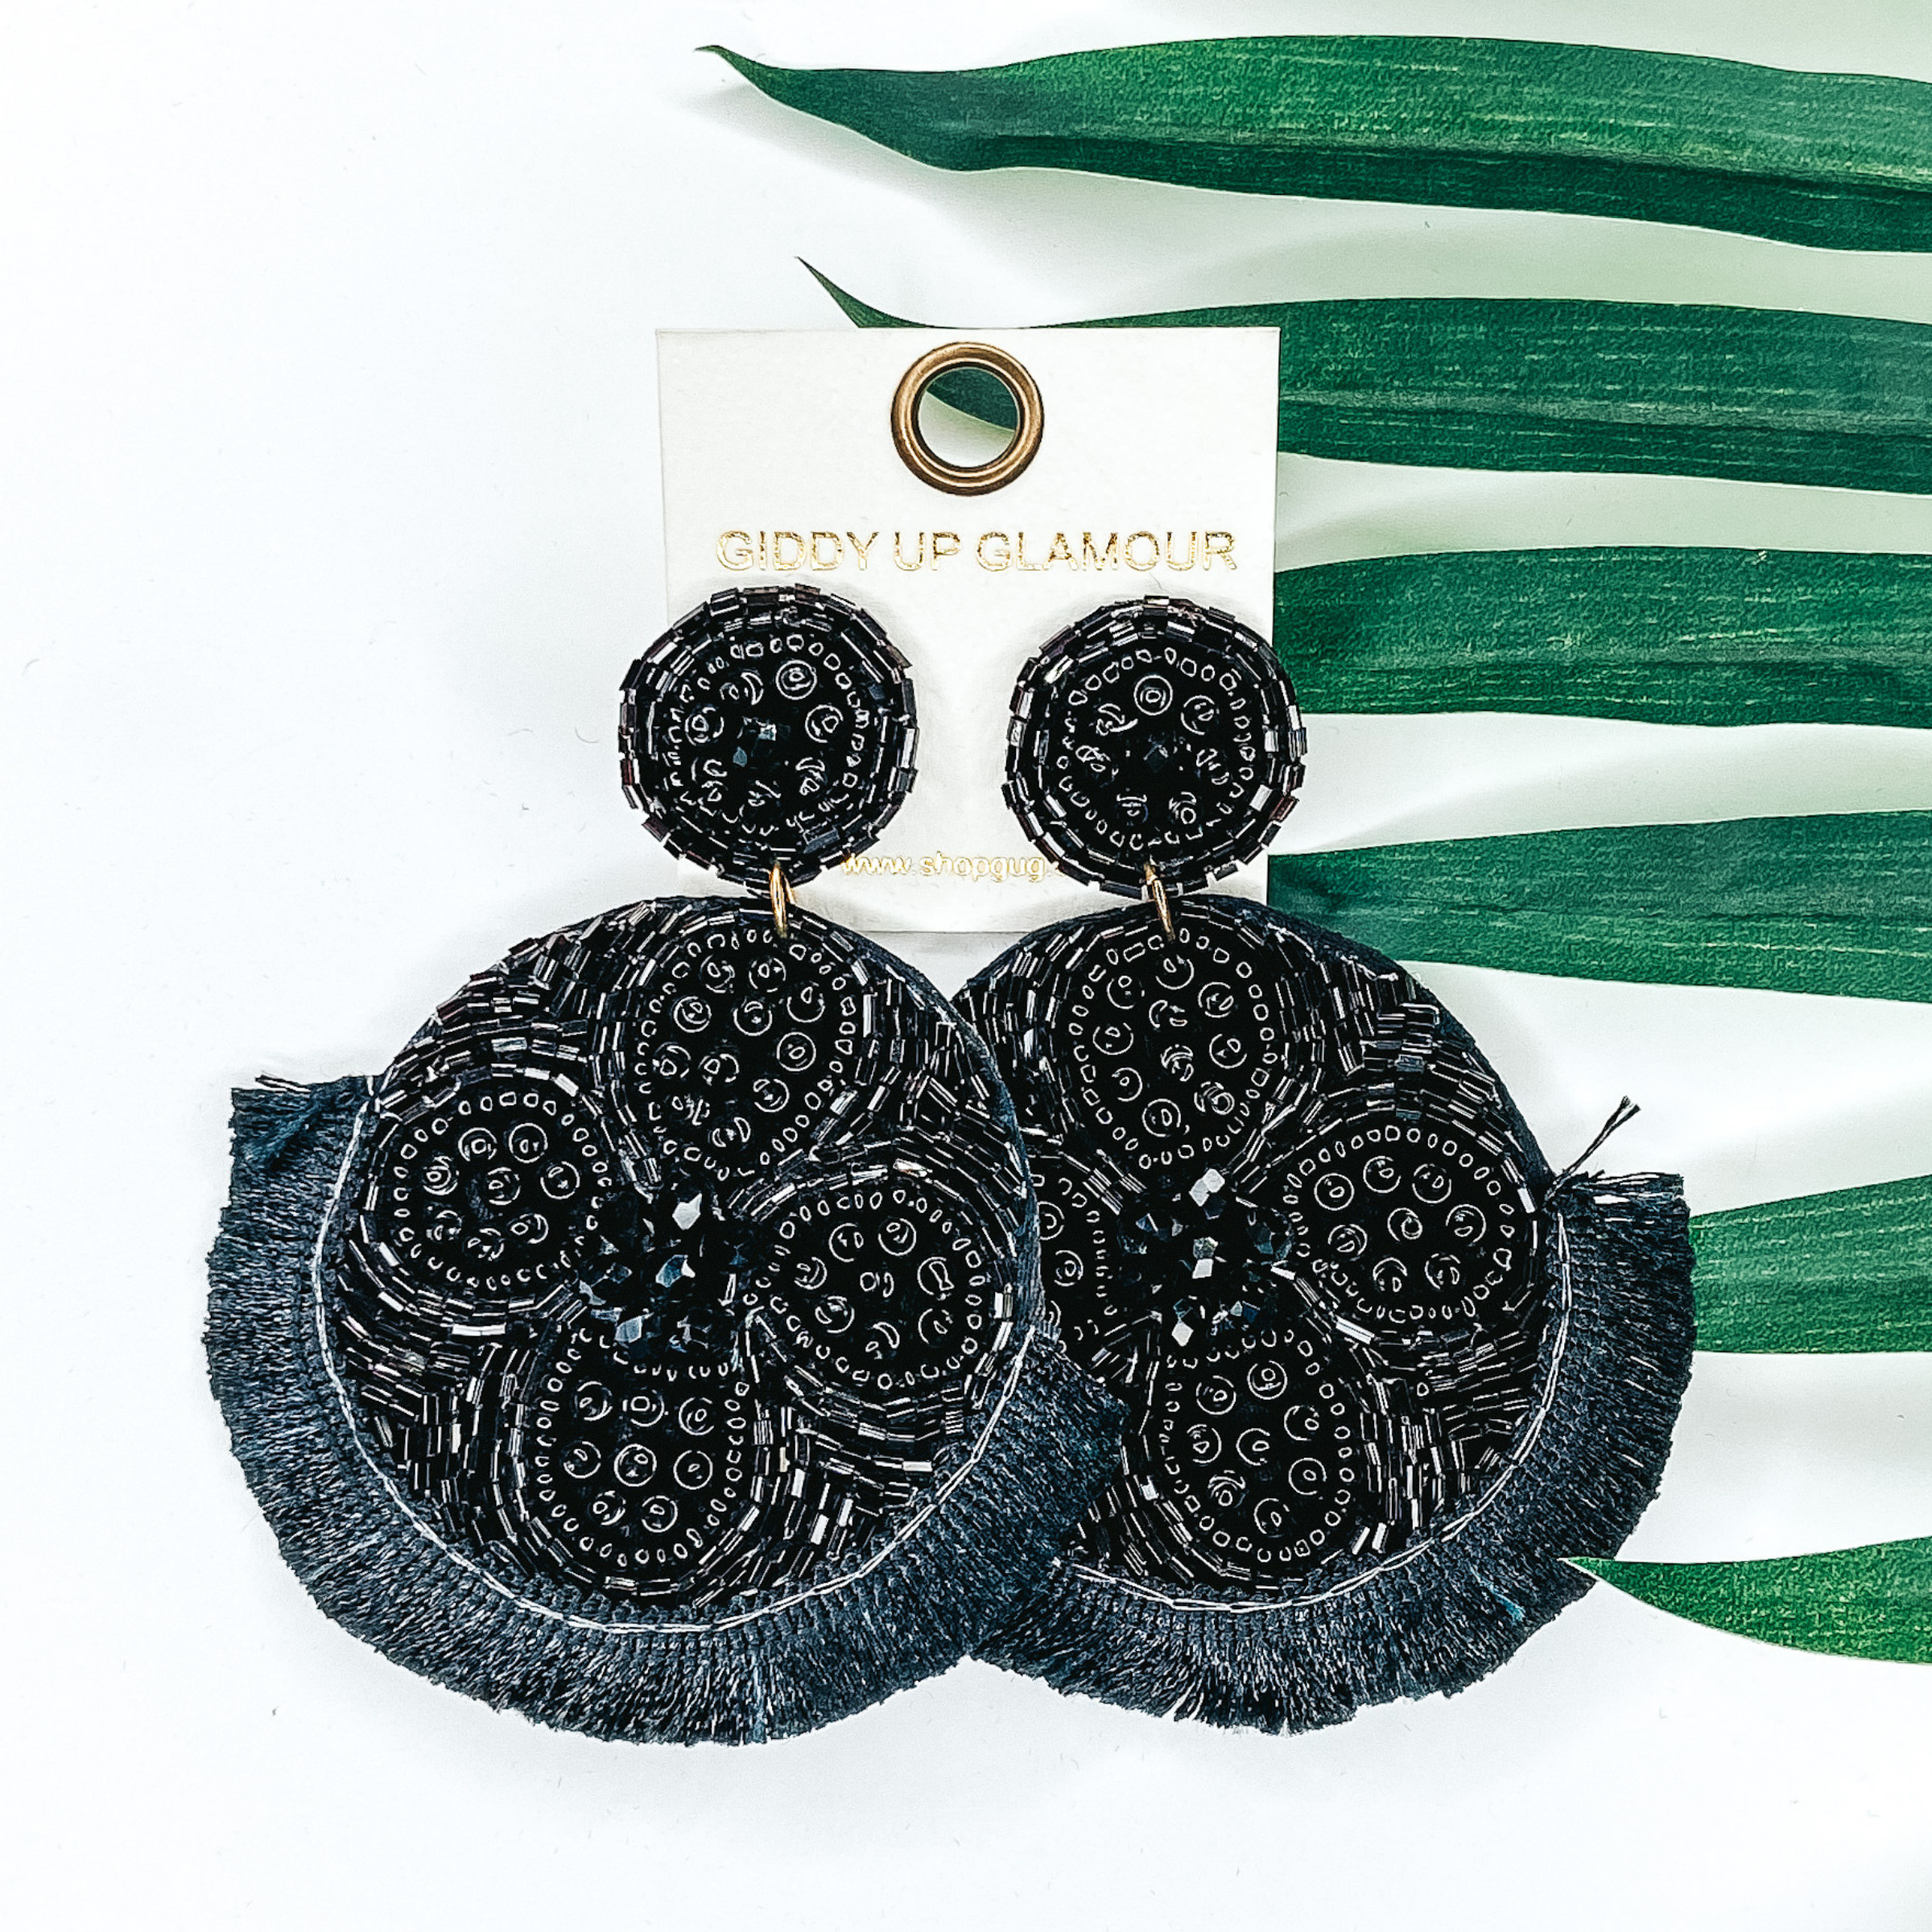 Black beaded circle post back earrings. Hanging from the earrings are black beaded circle pendant with black fringe. These earrings are pictured on a white background with green leaves behind them.